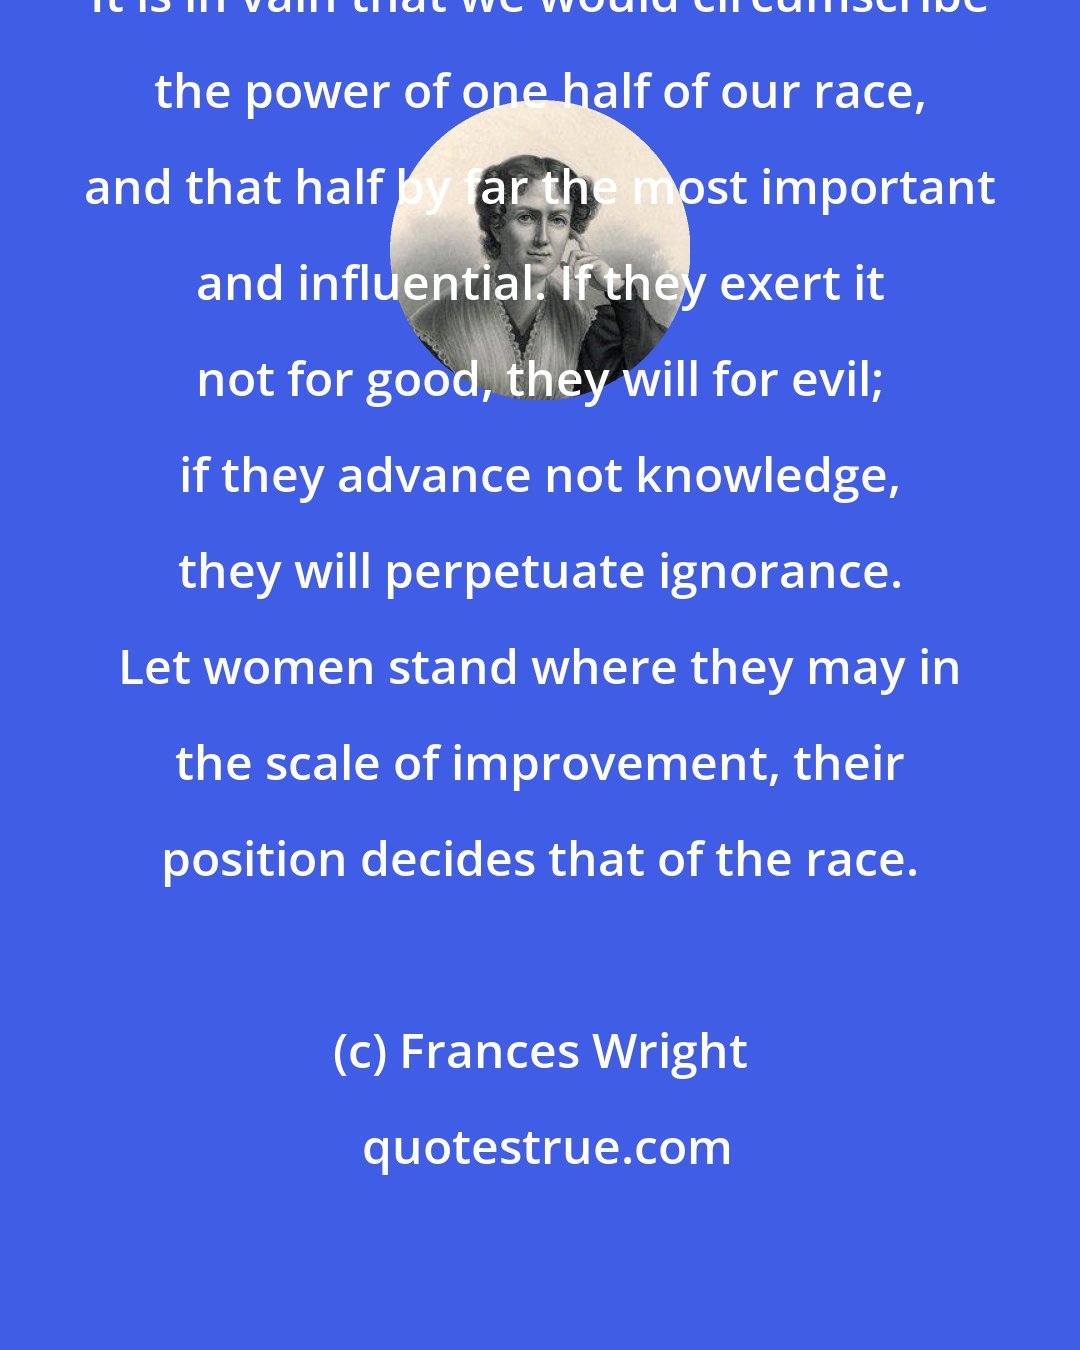 Frances Wright: It is in vain that we would circumscribe the power of one half of our race, and that half by far the most important and influential. If they exert it not for good, they will for evil; if they advance not knowledge, they will perpetuate ignorance. Let women stand where they may in the scale of improvement, their position decides that of the race.